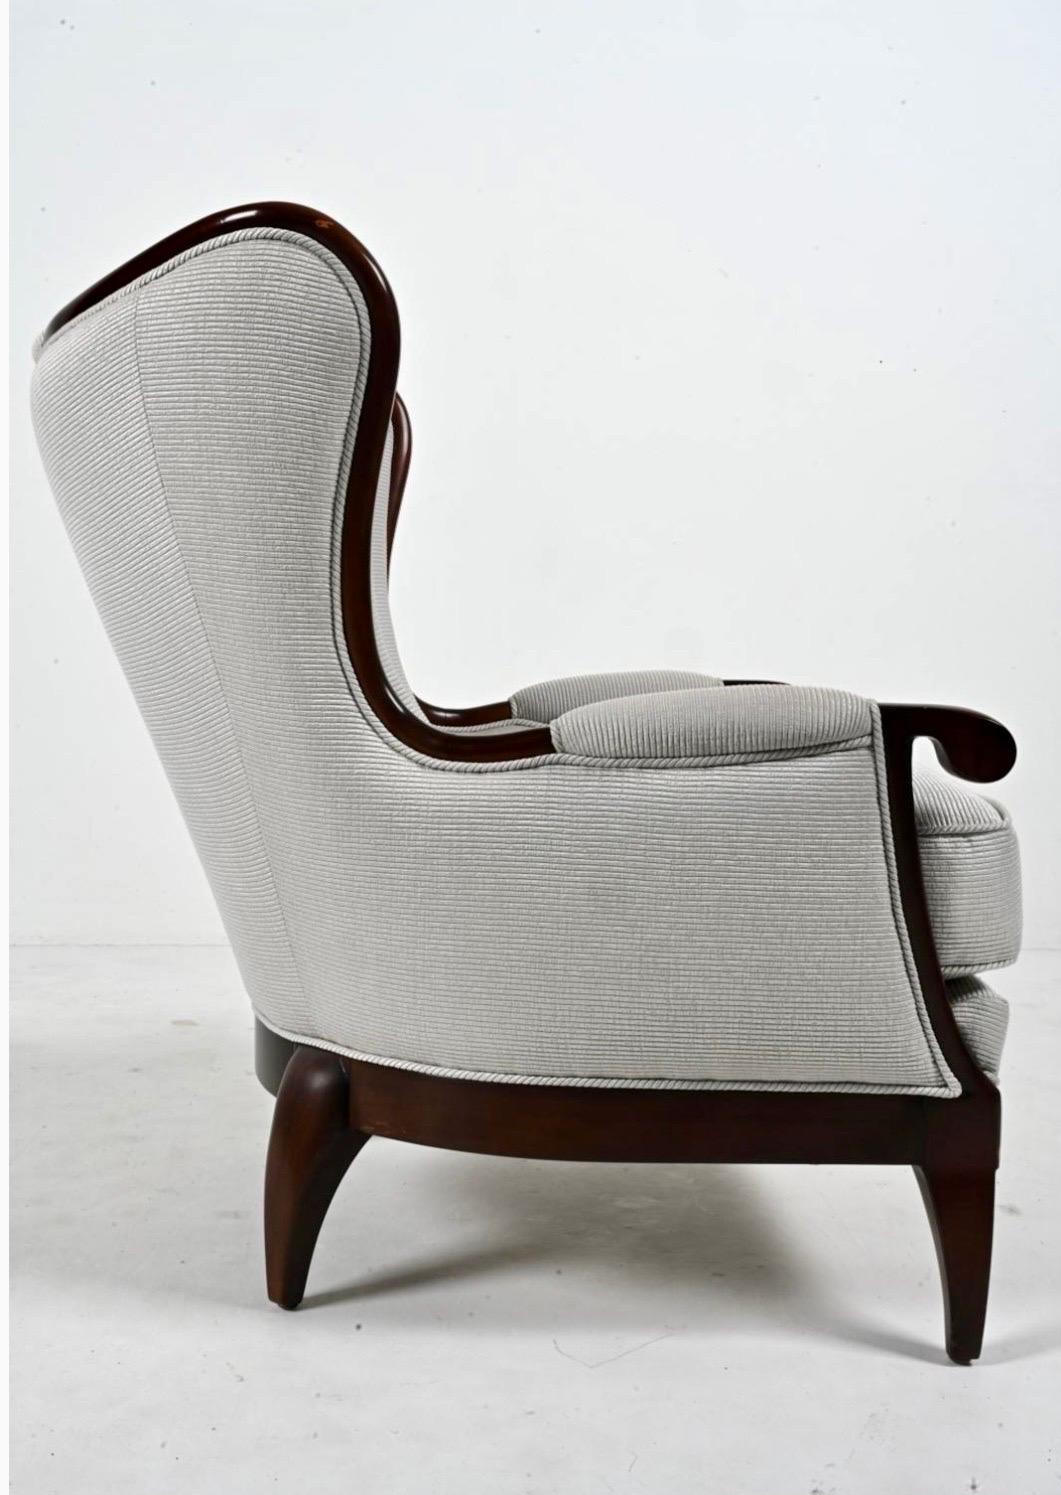 American Edward Ferrell Modern Upholstered Mahogany Wingback Reading Chair Armchair